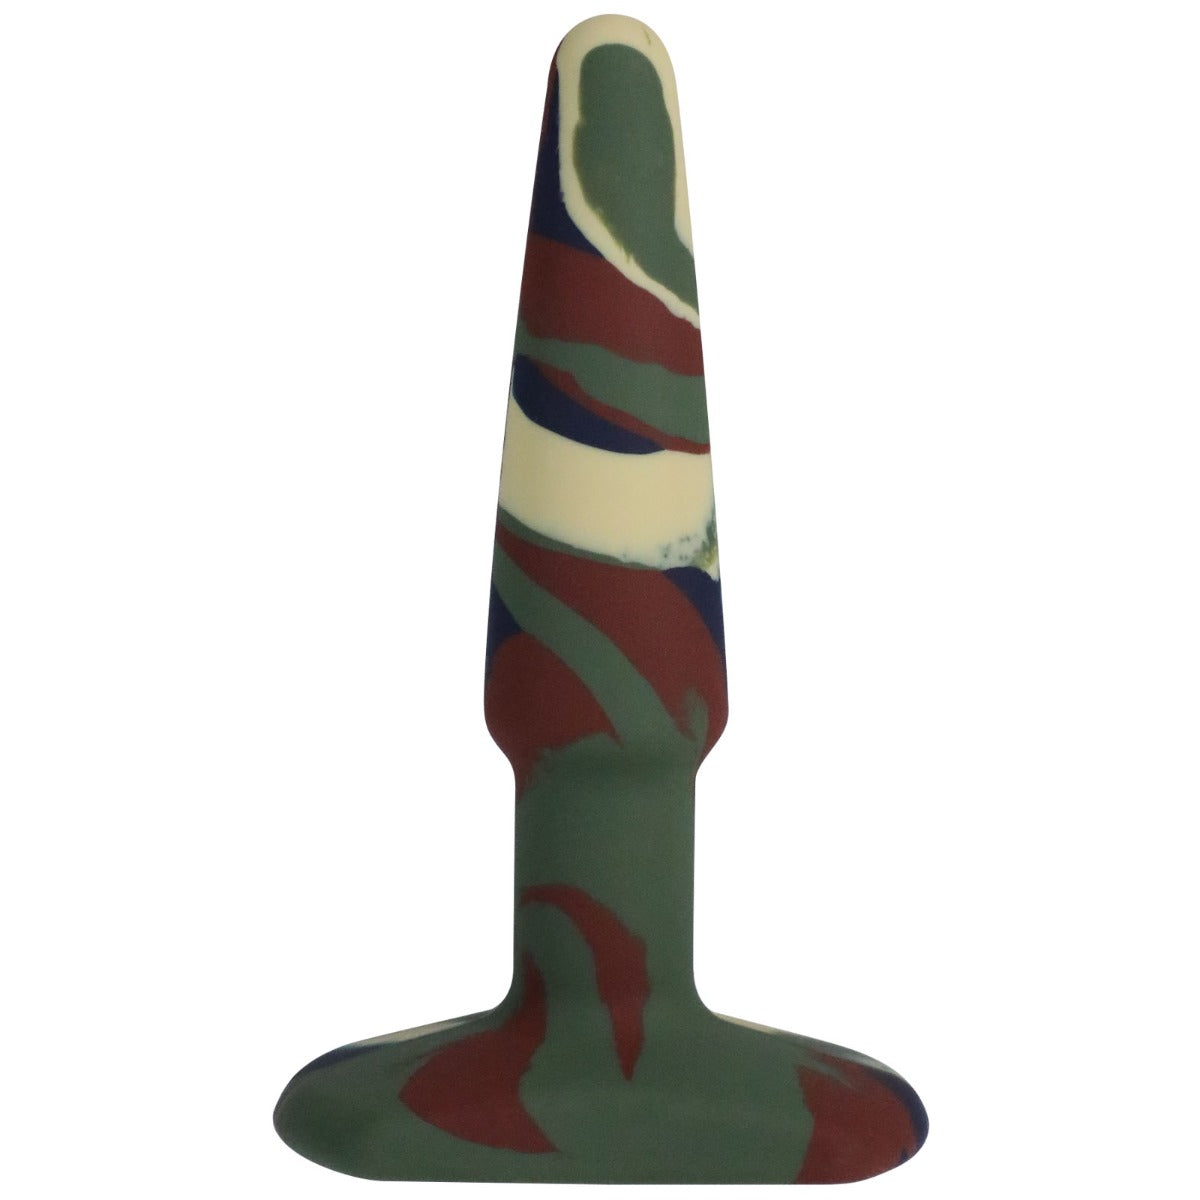 A-Play Groovy Silicone Butt Plug Camouflage 4 Inch